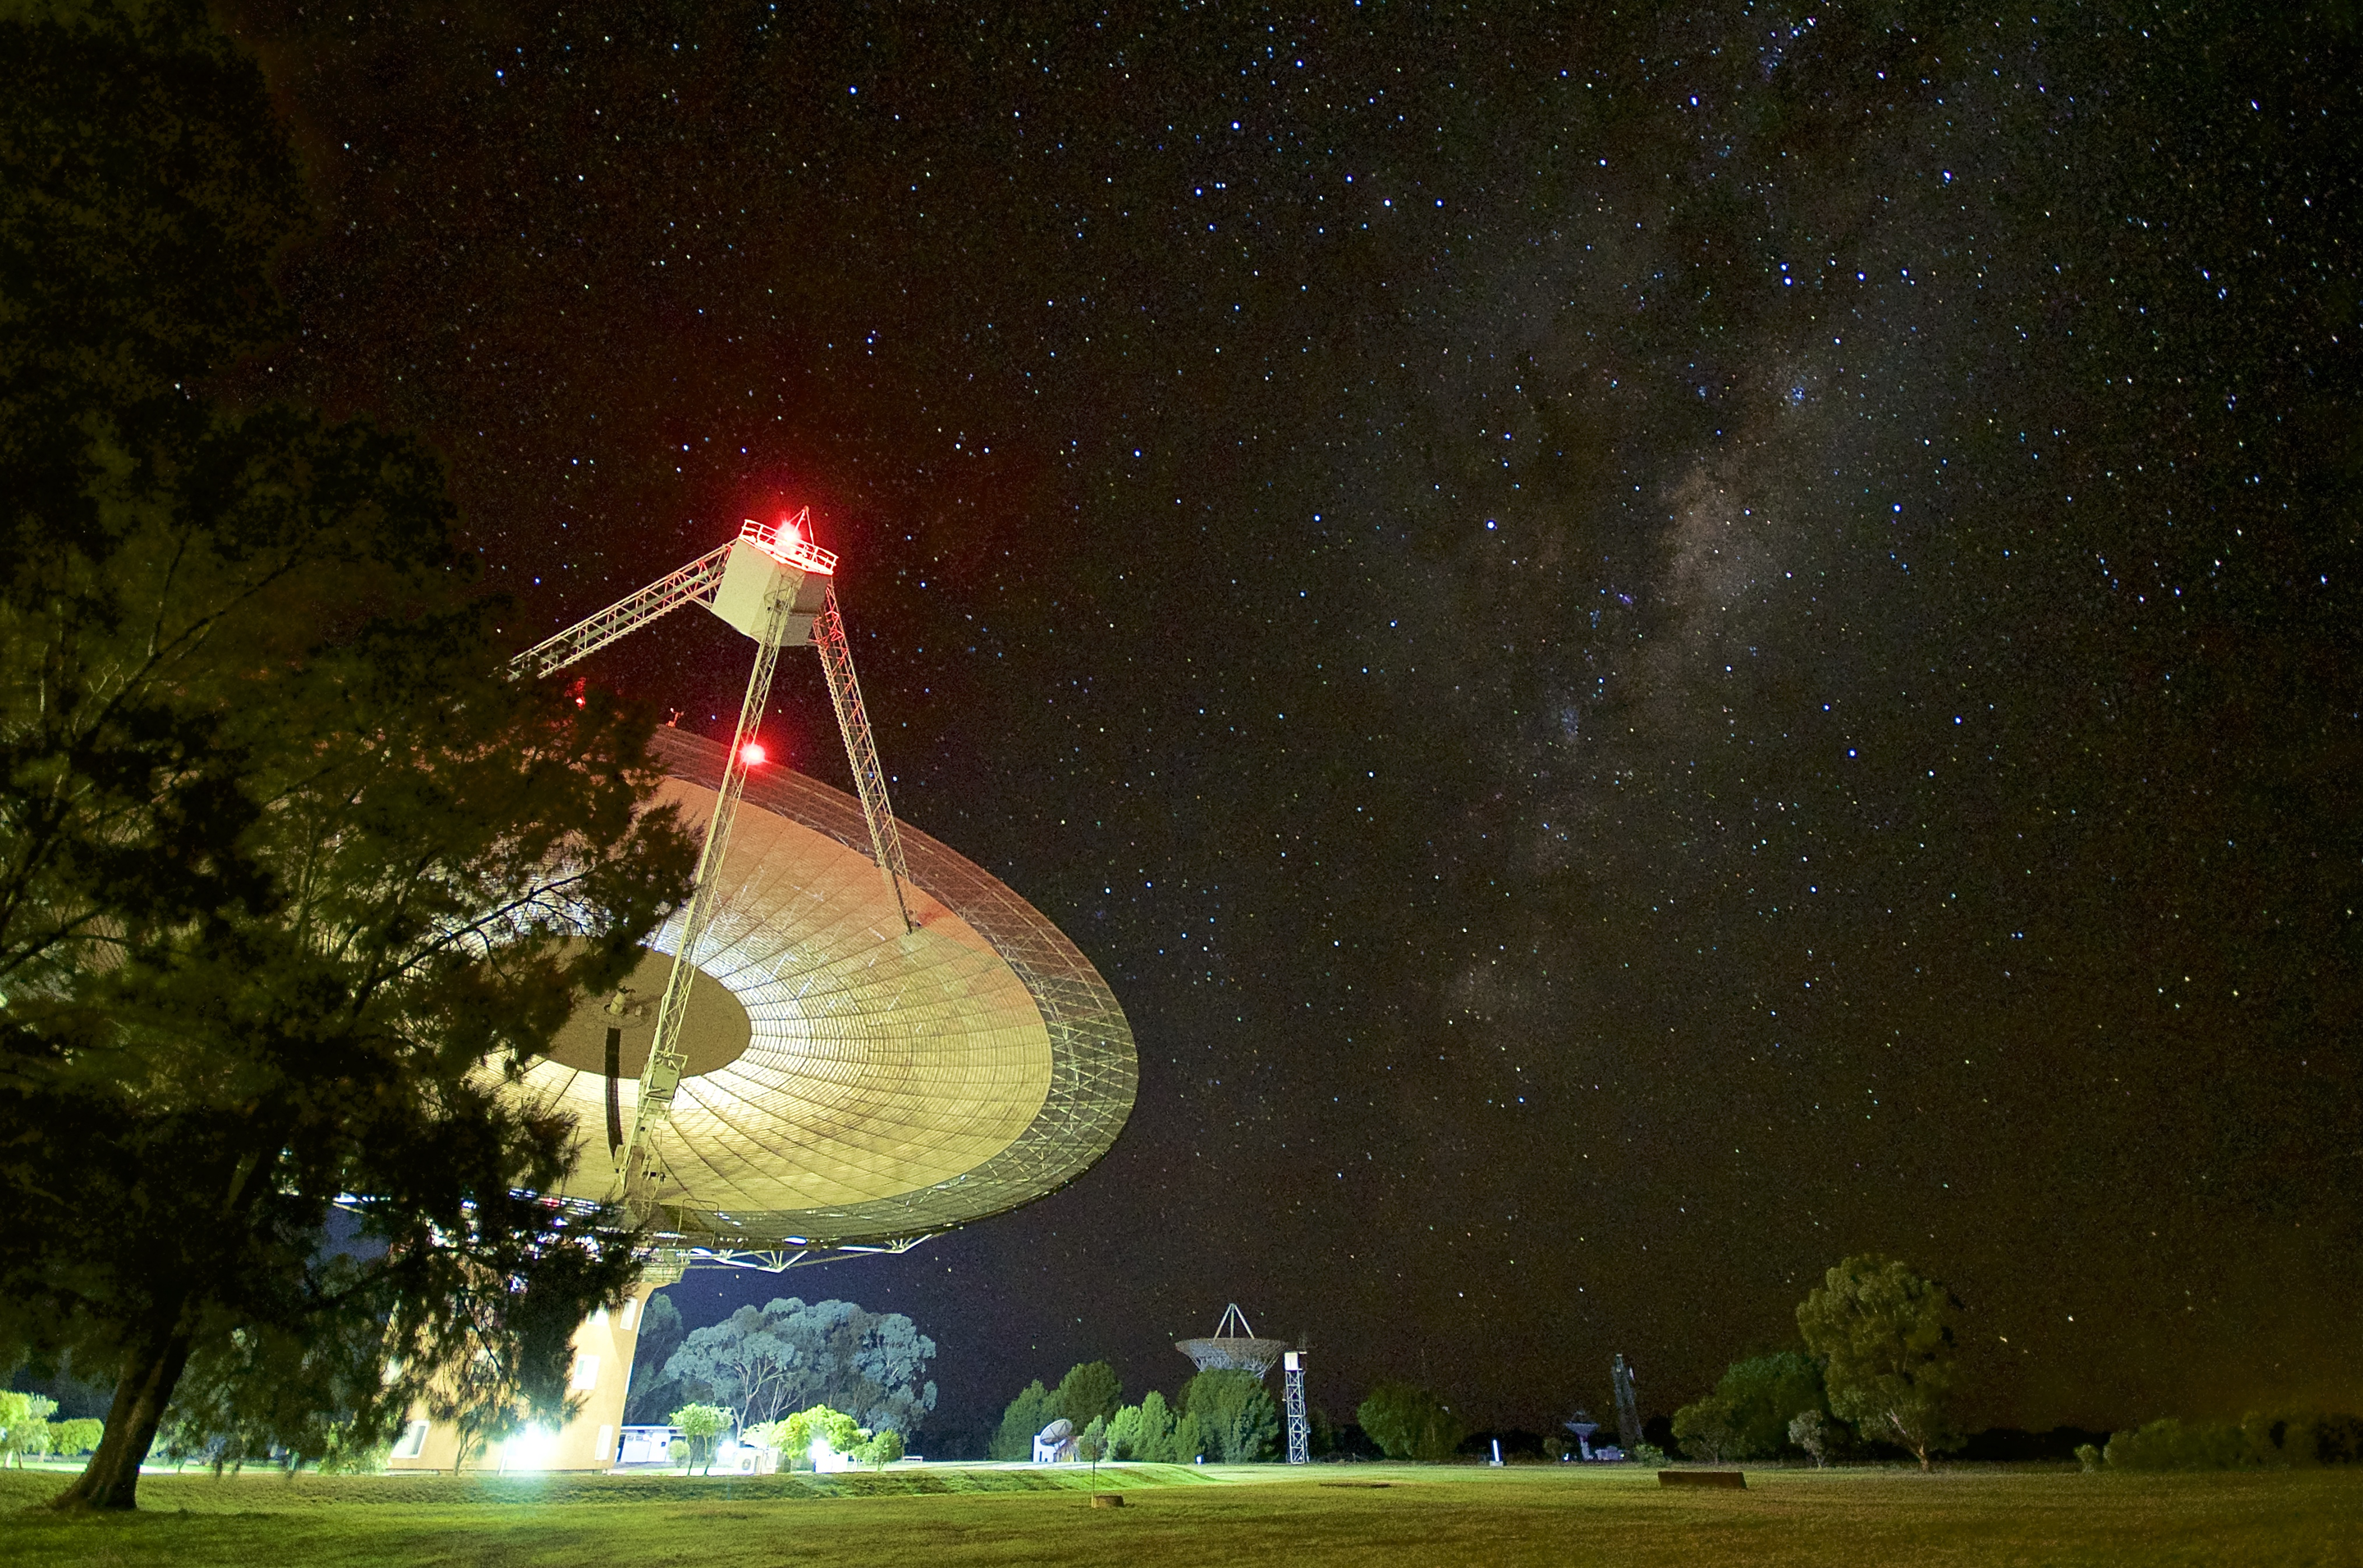 Radio telescope with lights on at night, and stars in the sky above.